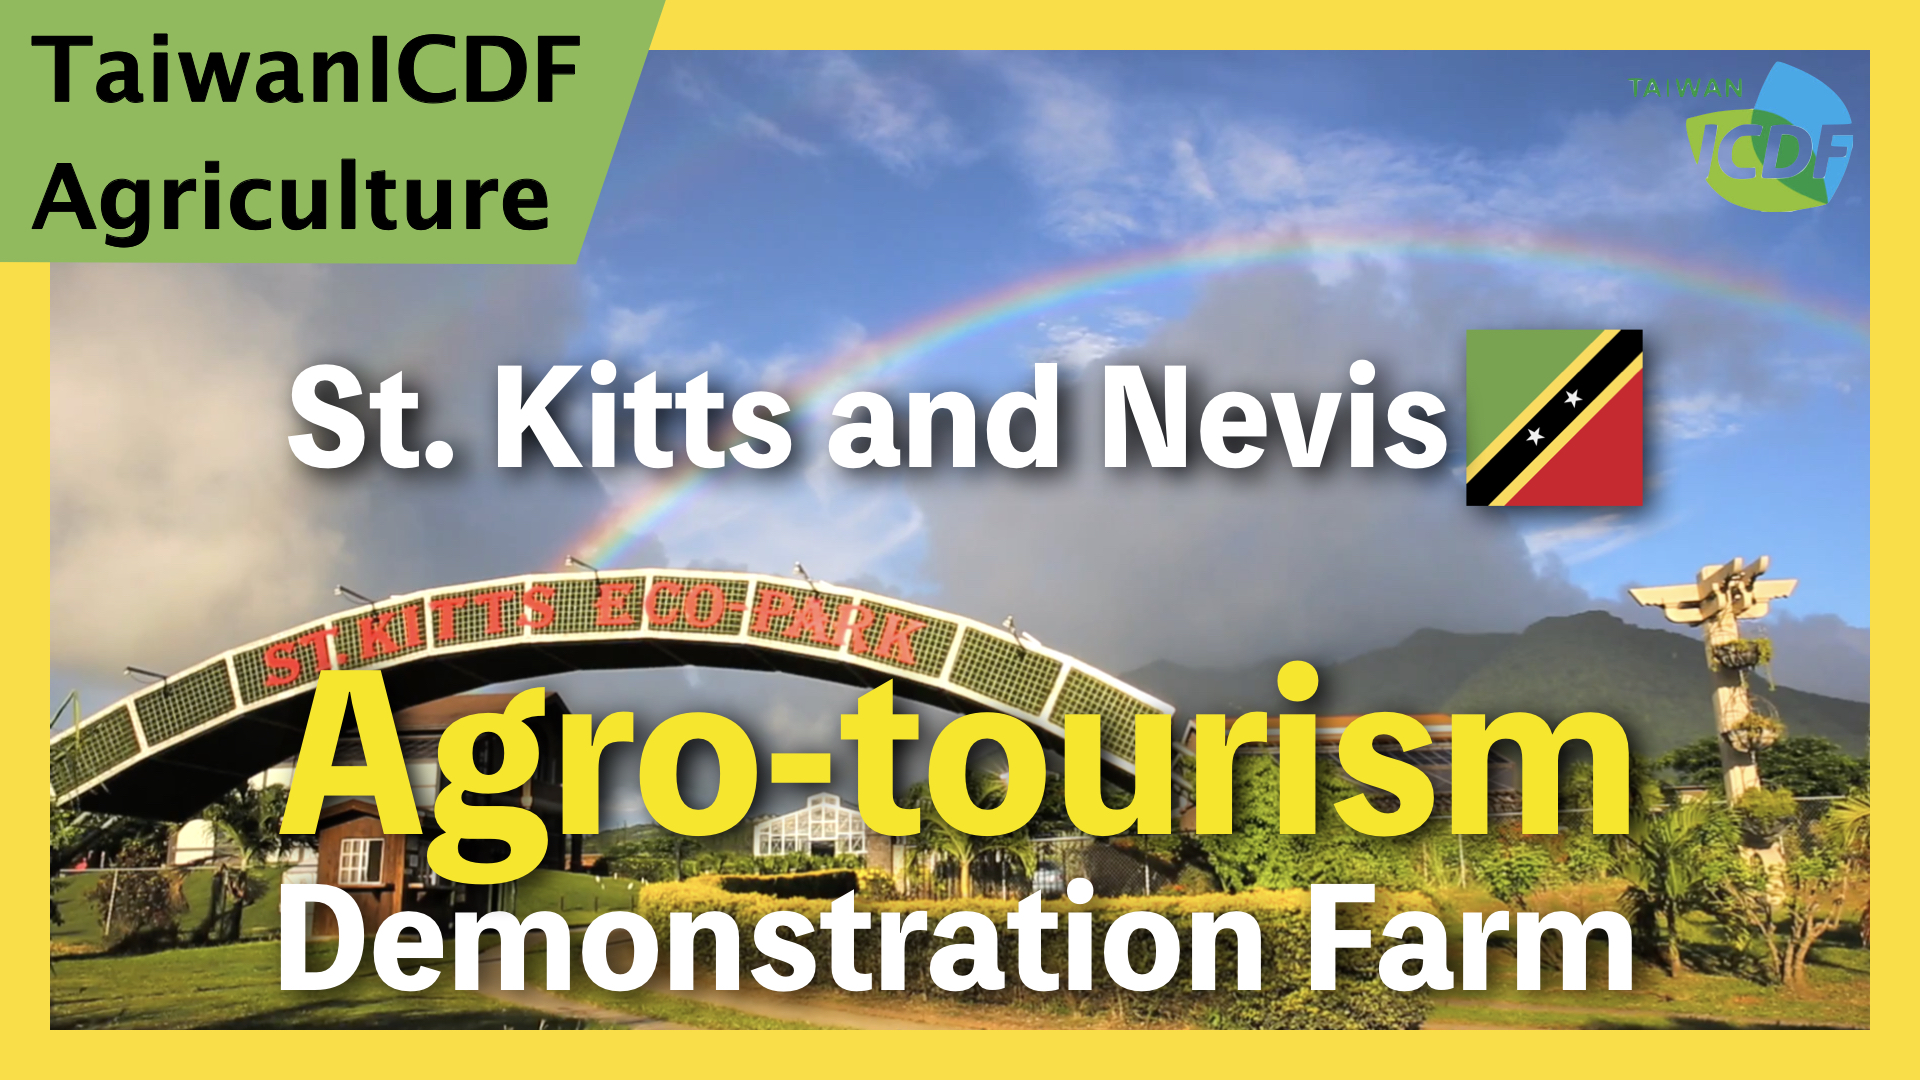 Agro-tourism Demonstration Farm Cooperation Project (St. Kitts and Nevis)